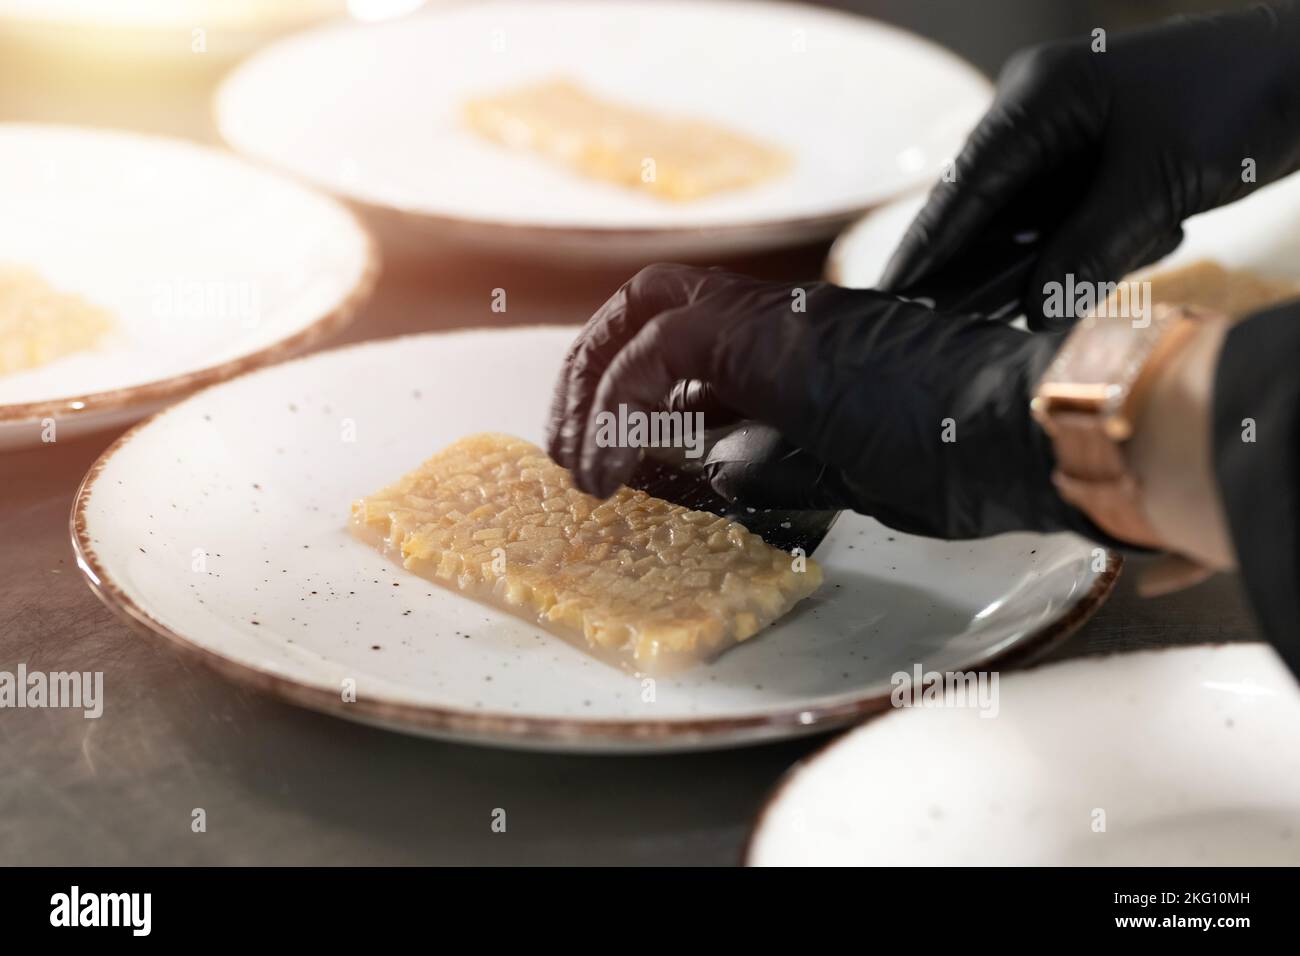 Hand serving a cut of quince jelly in restaurant counter Stock Photo